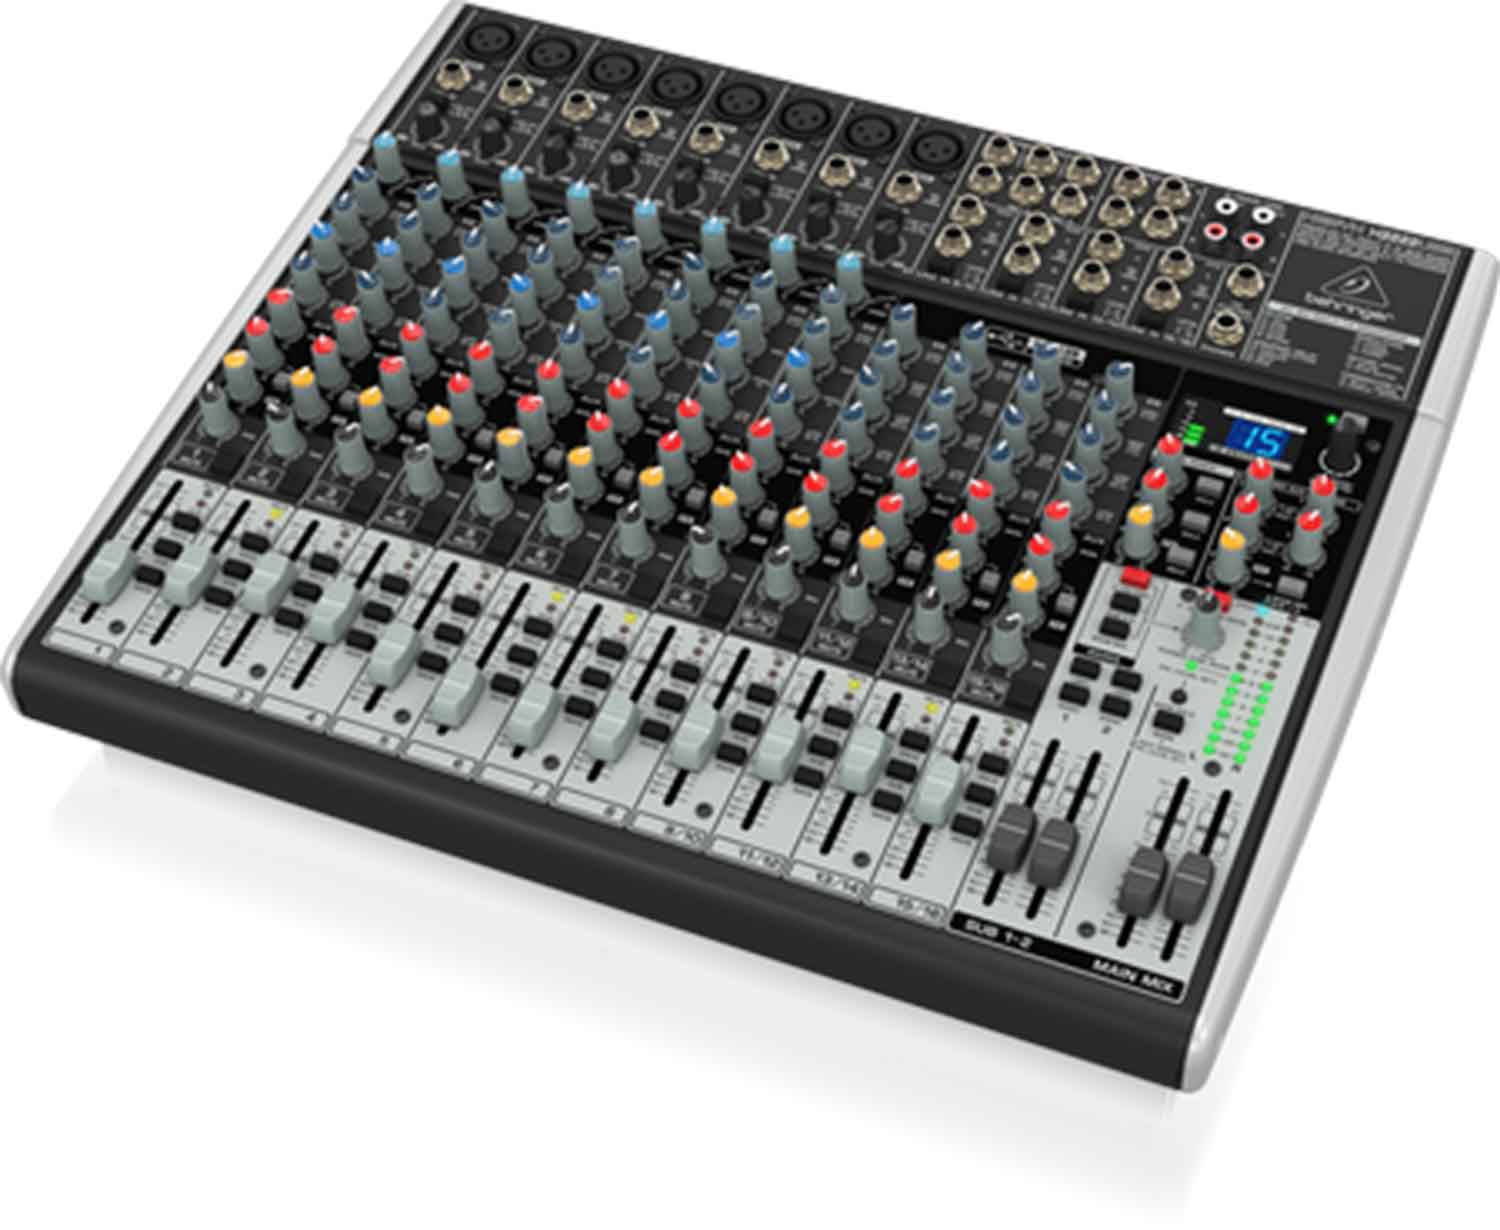 Behringer Premium 22-Input 2/2-Bus Mixer With XENYX Mic Preamps And Compressors - Hollywood DJ